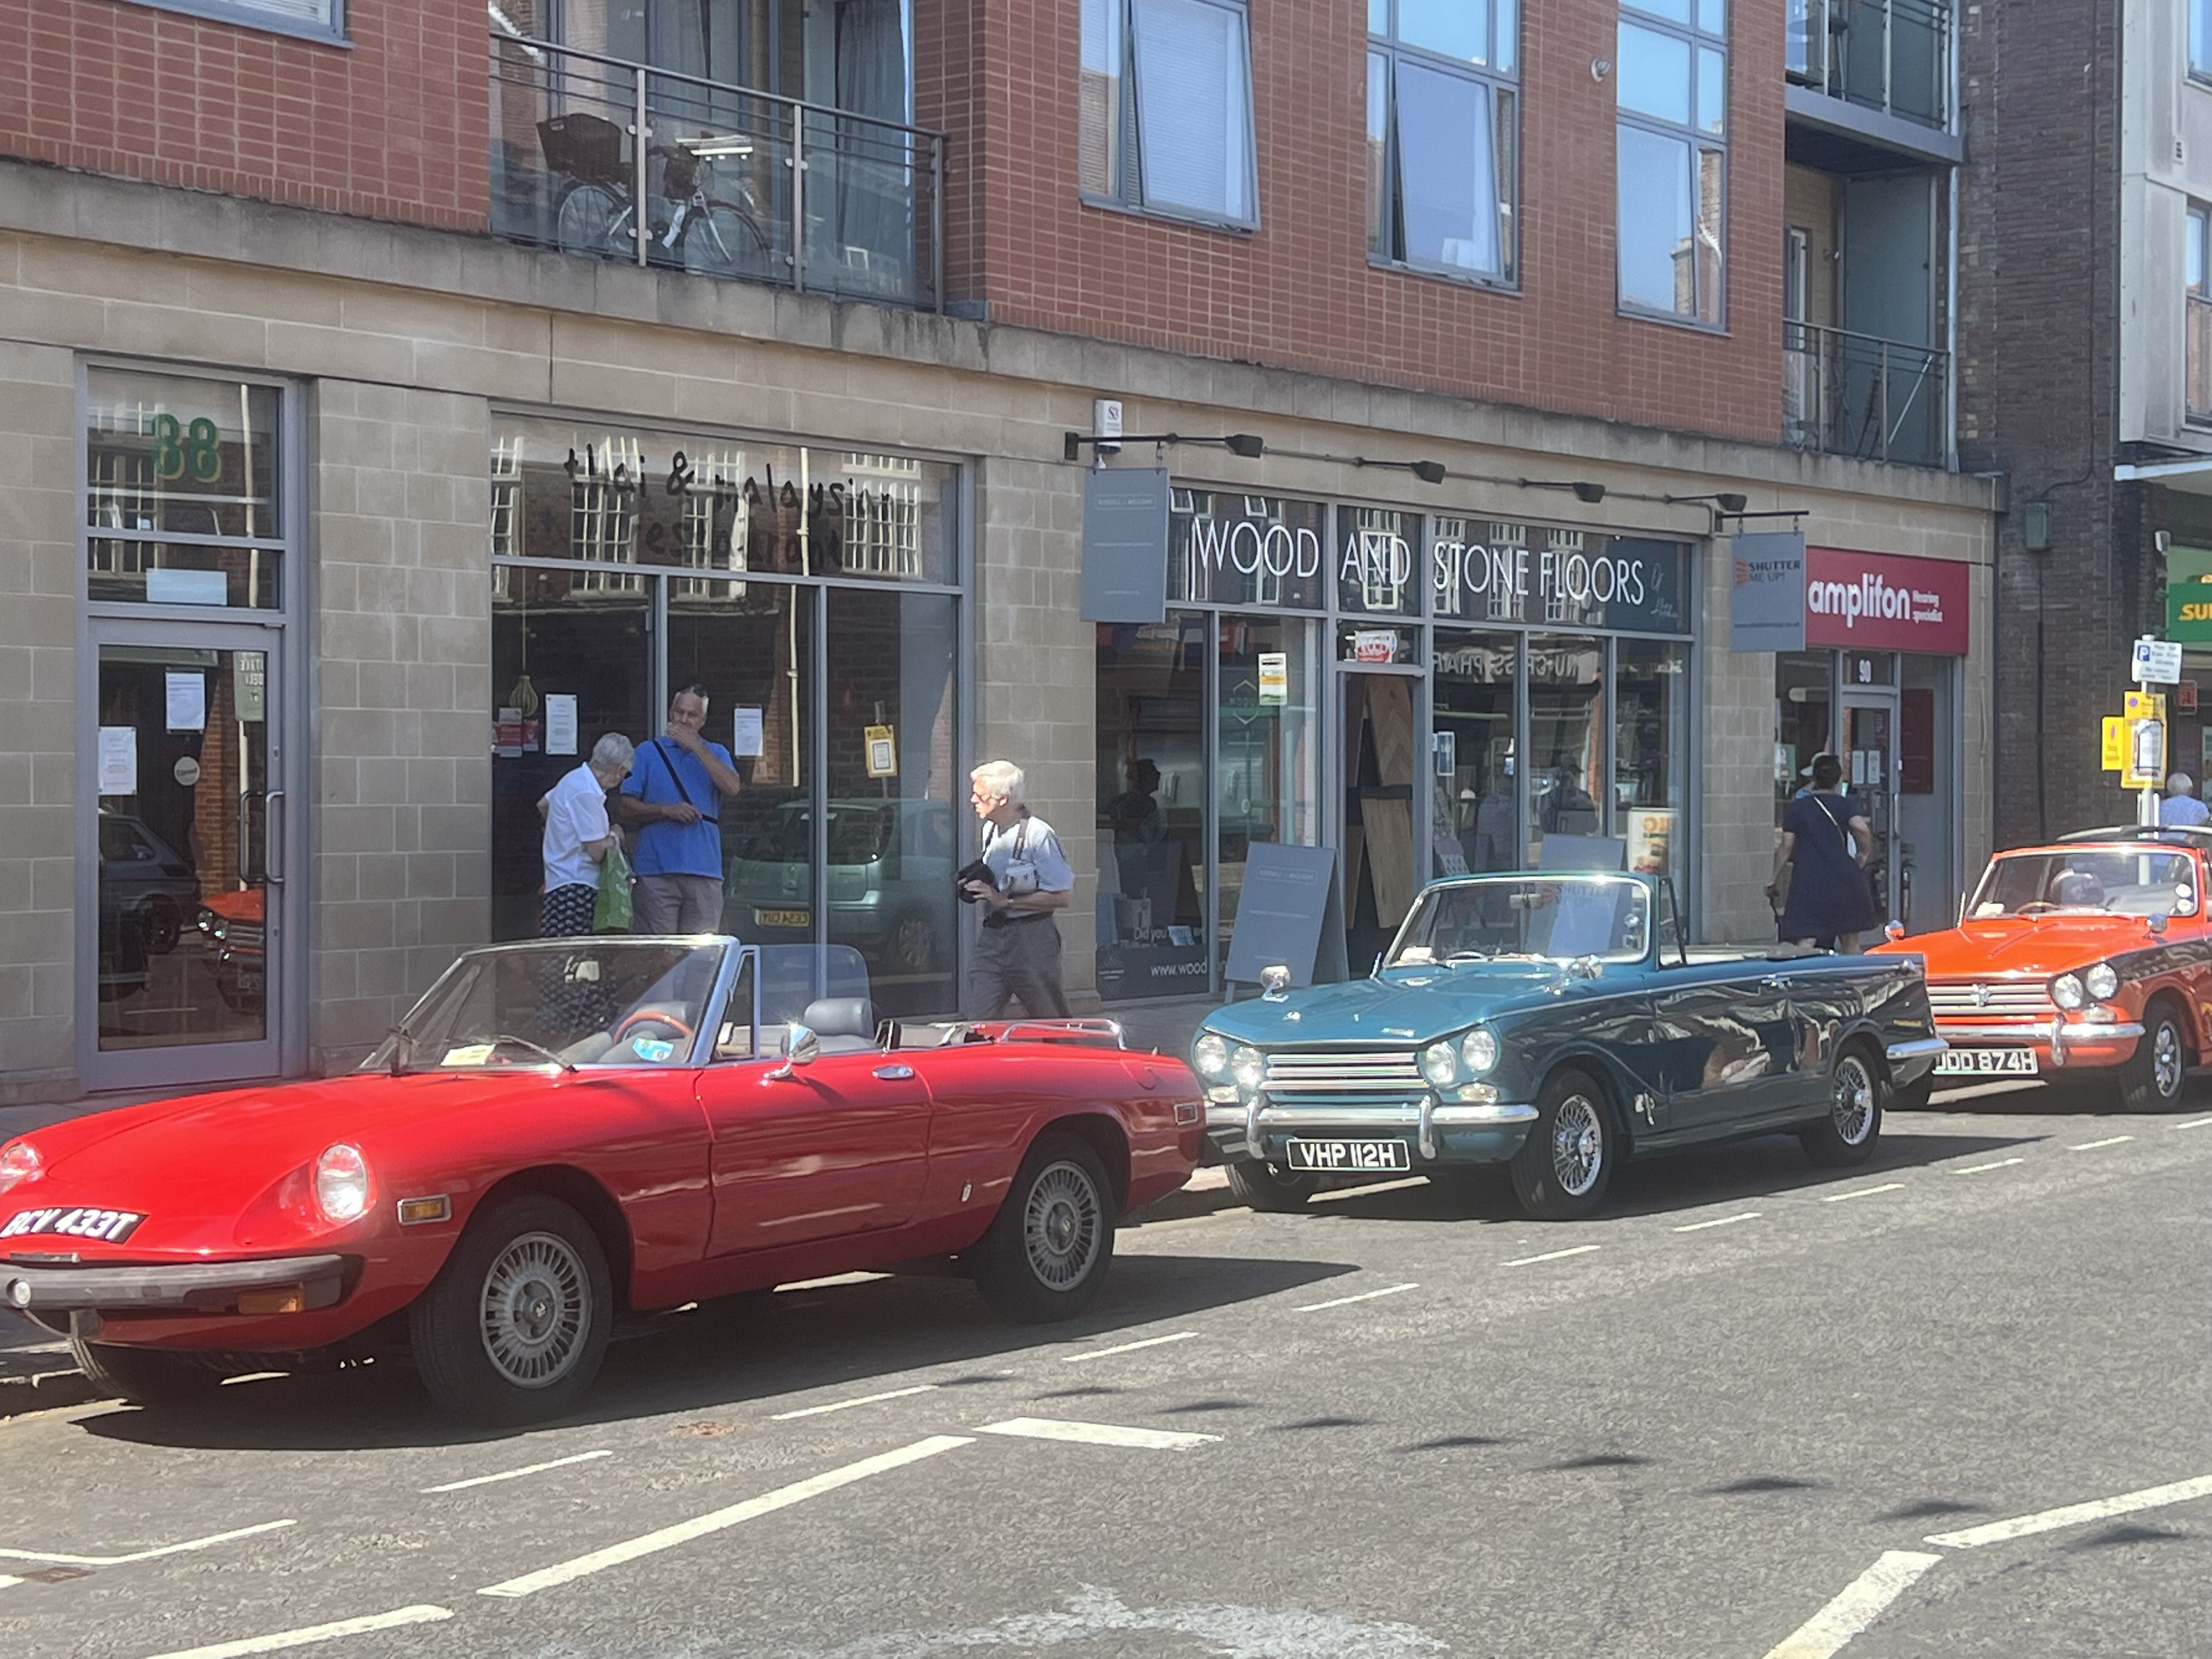 Classic cars on display during Hermitage Road Day. CREDIT: @HitchinNubNews